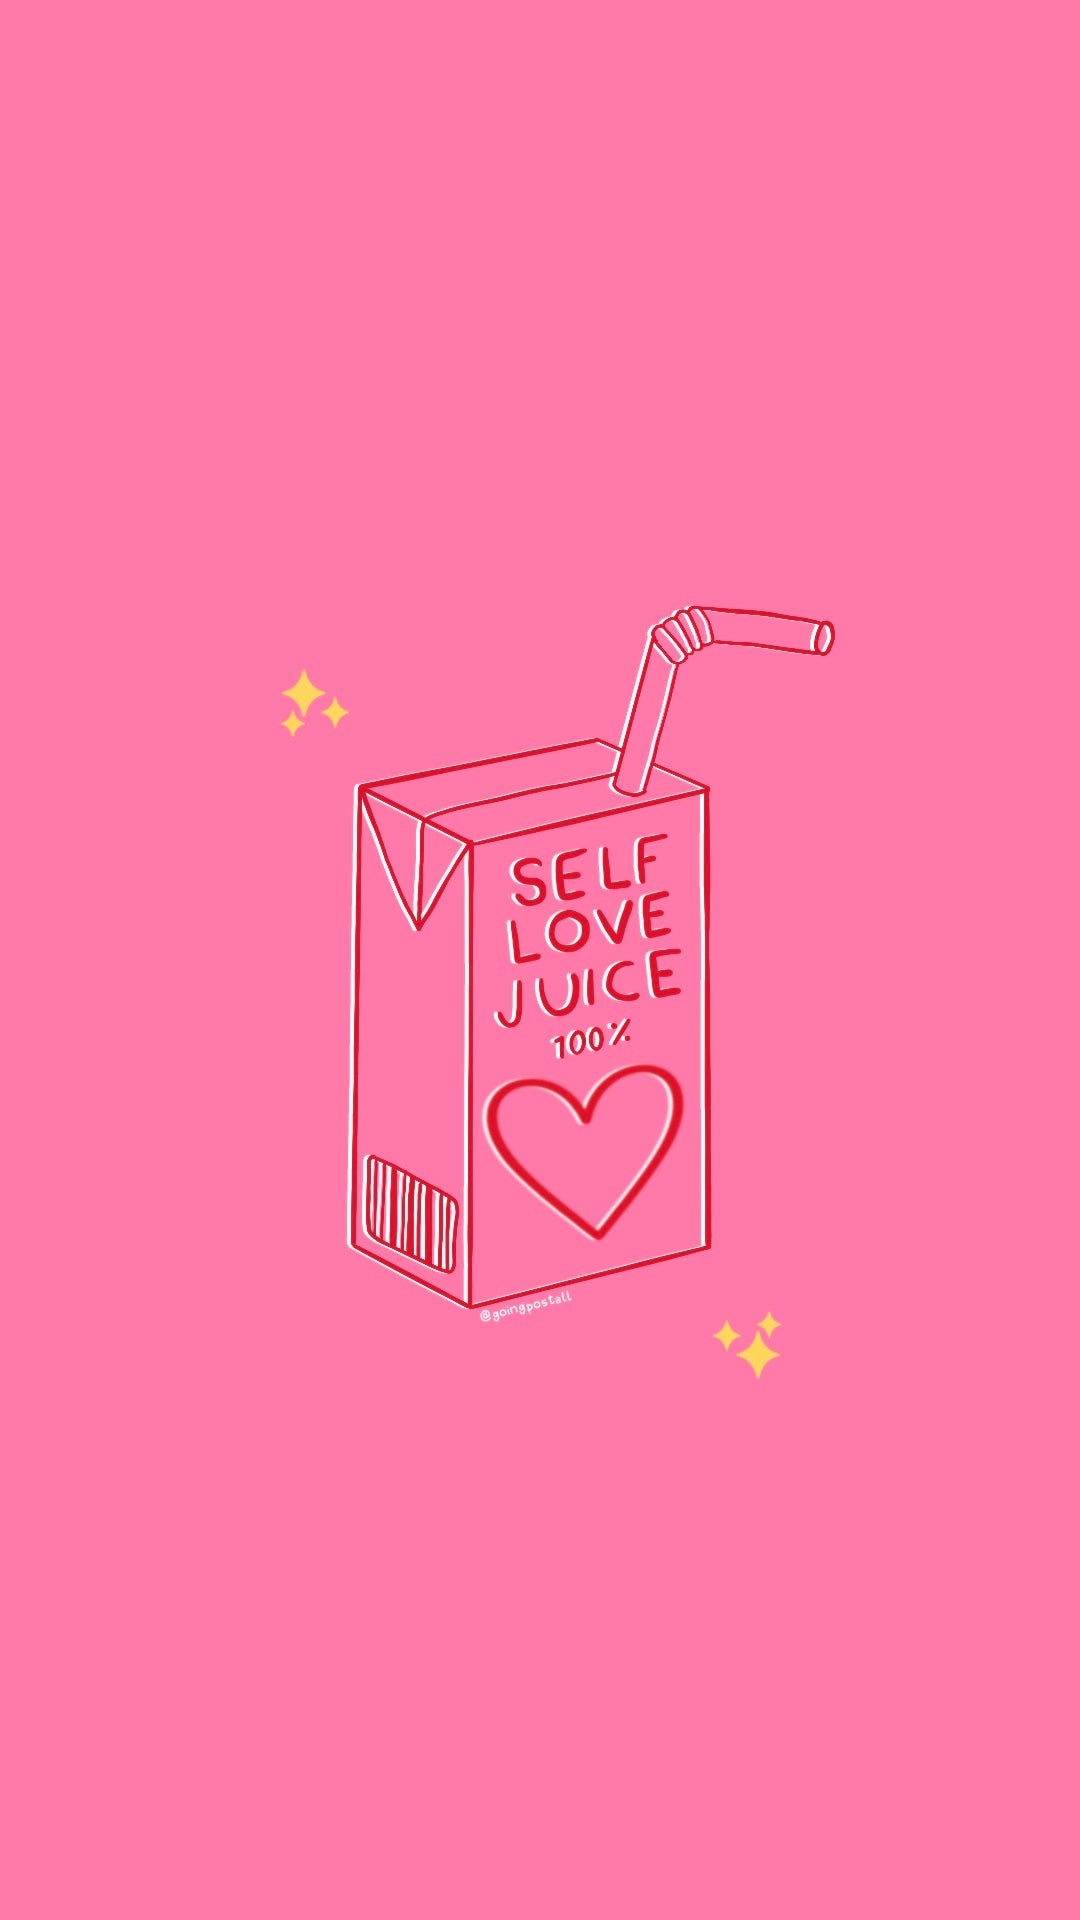 Hana Dahlia on Twitter Self love wallpaper  Feel free to save and  share  a thread httpstco9iLmuOiPlb  X